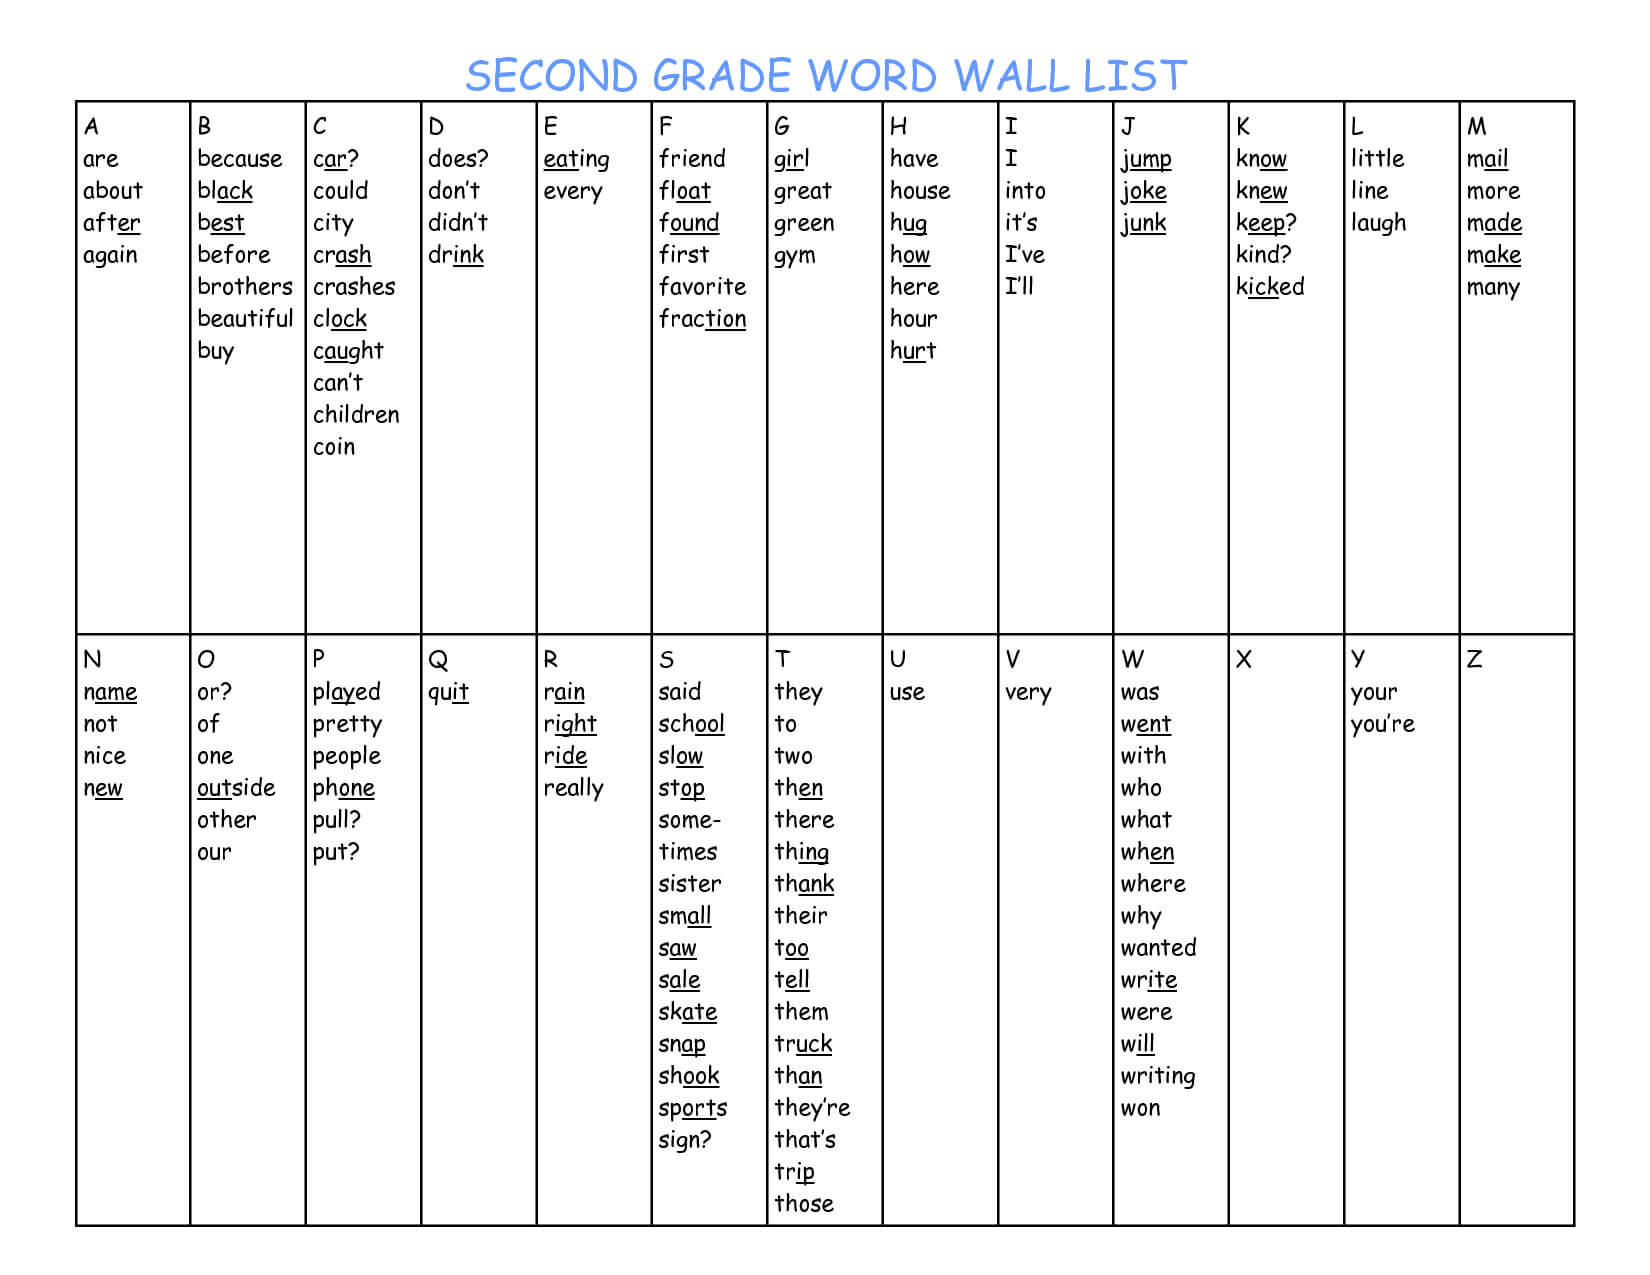 Personal Word Wall Template. Word Wall Headers Chang 39 E 3 In Blank Word Wall Template Free